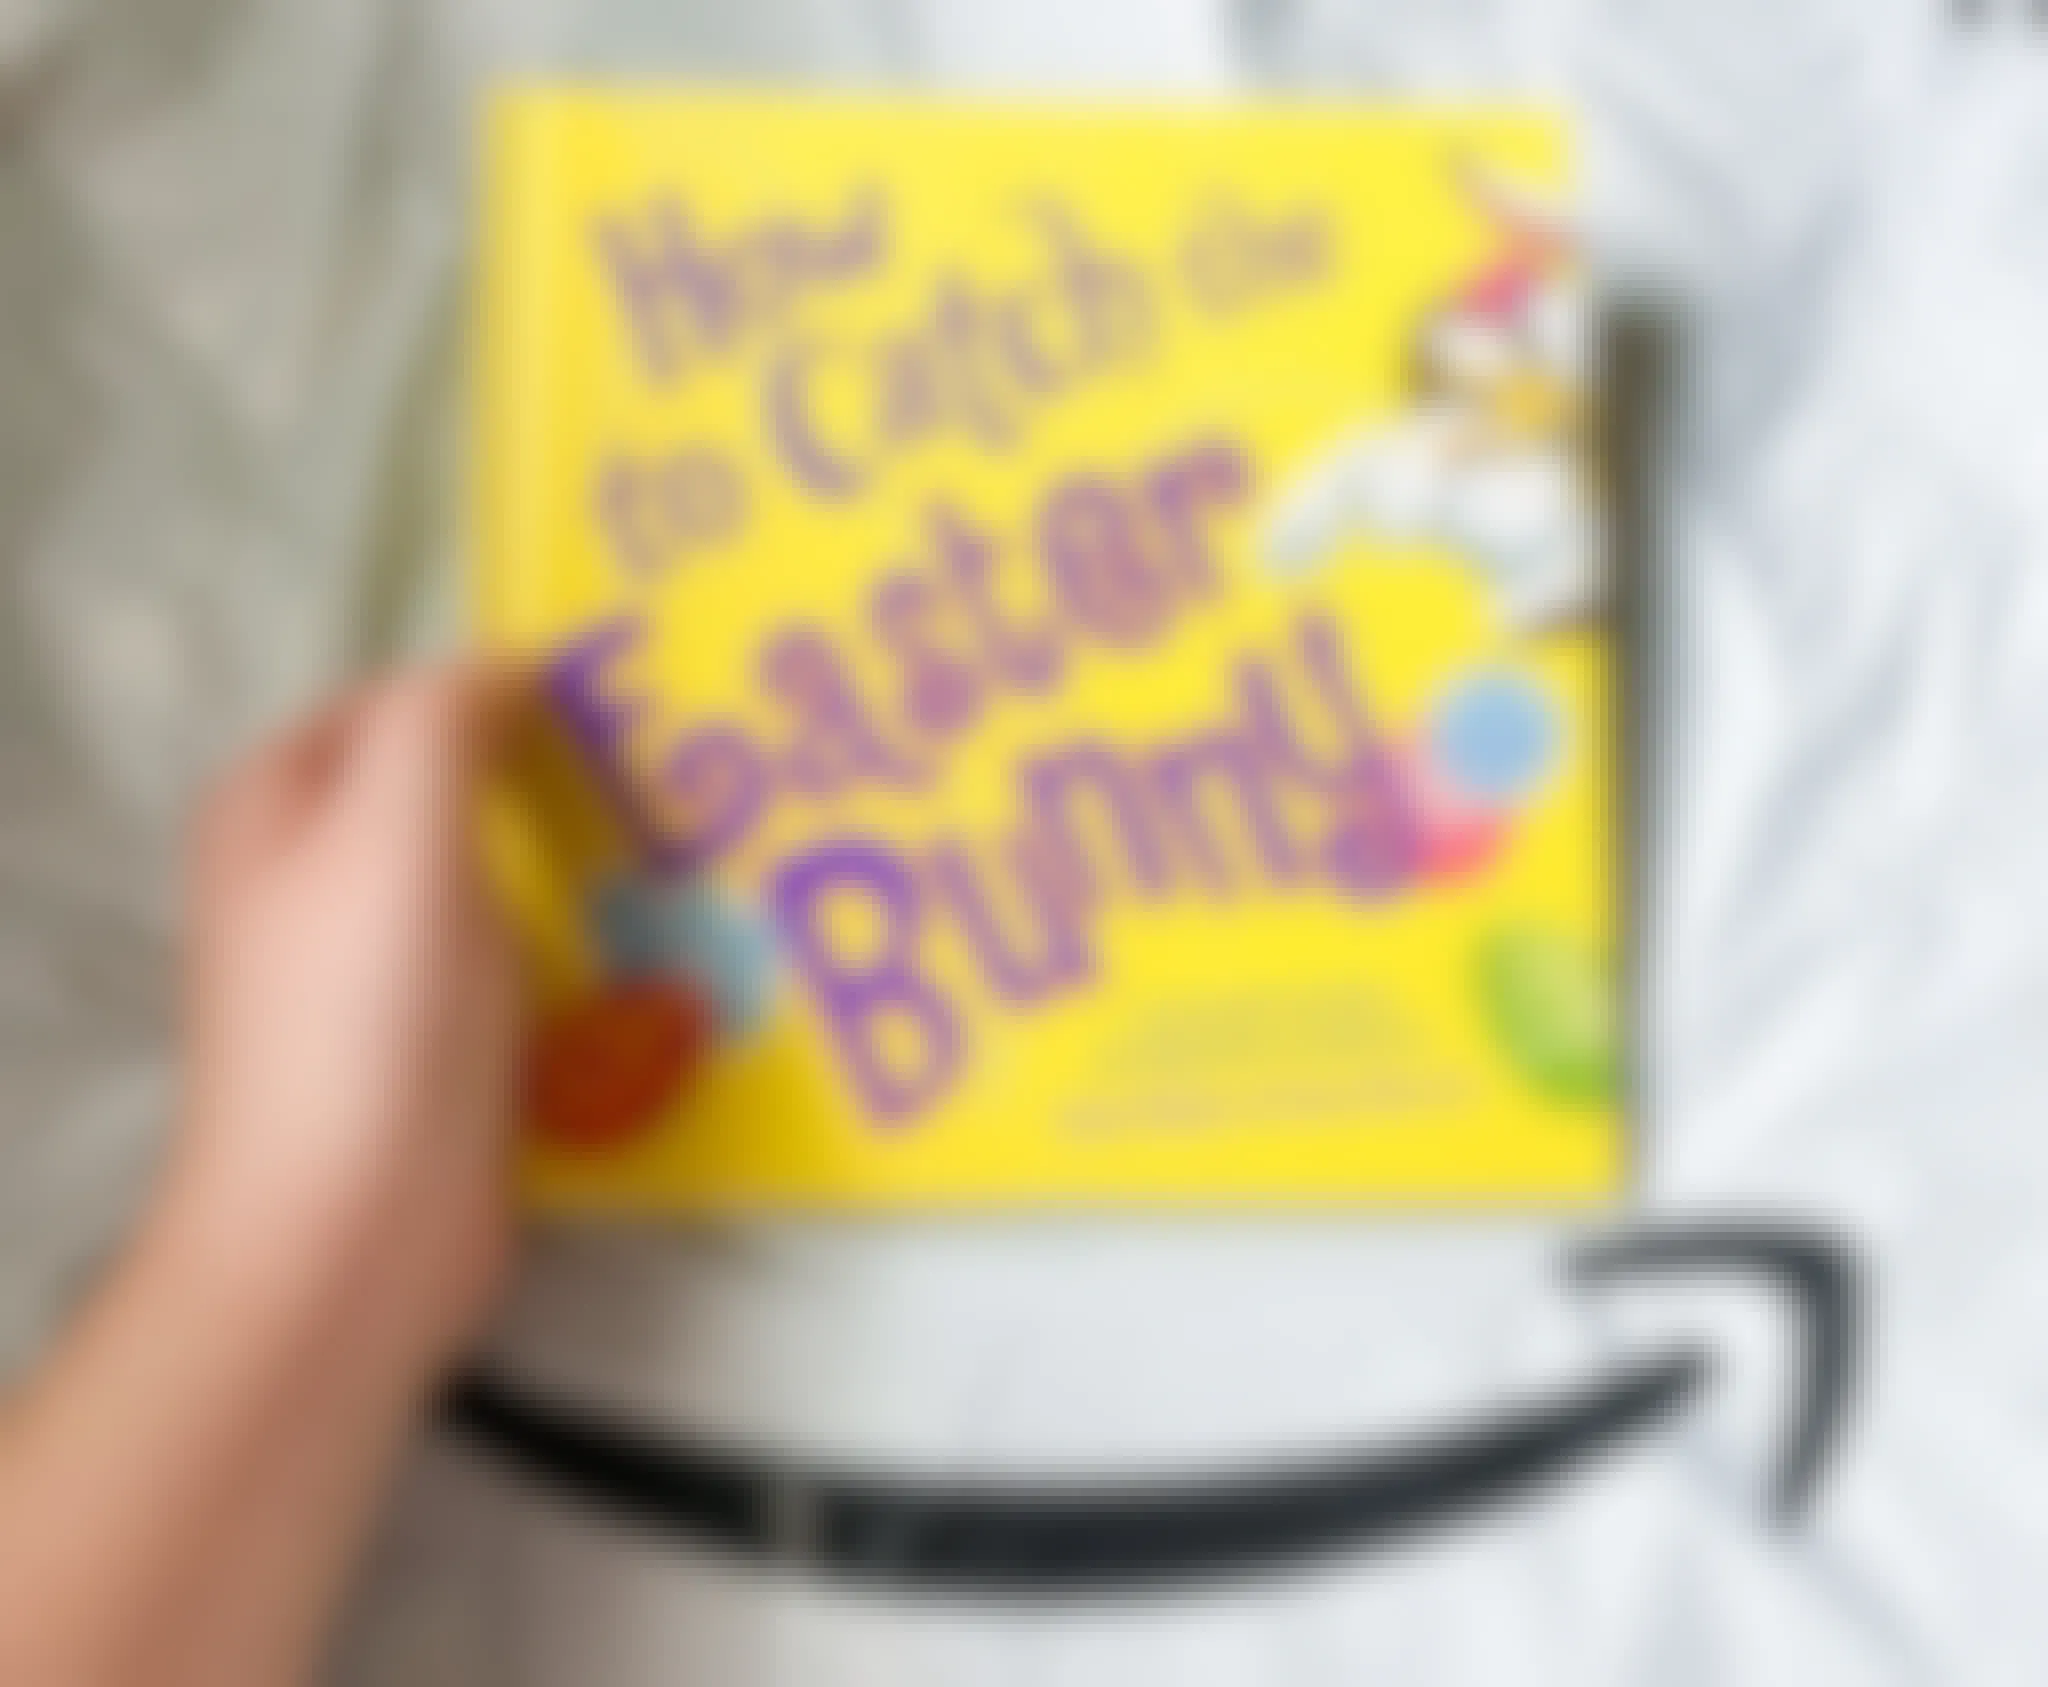 A How to Catch the Easter Bunny children's book on top of an amazon shipping package